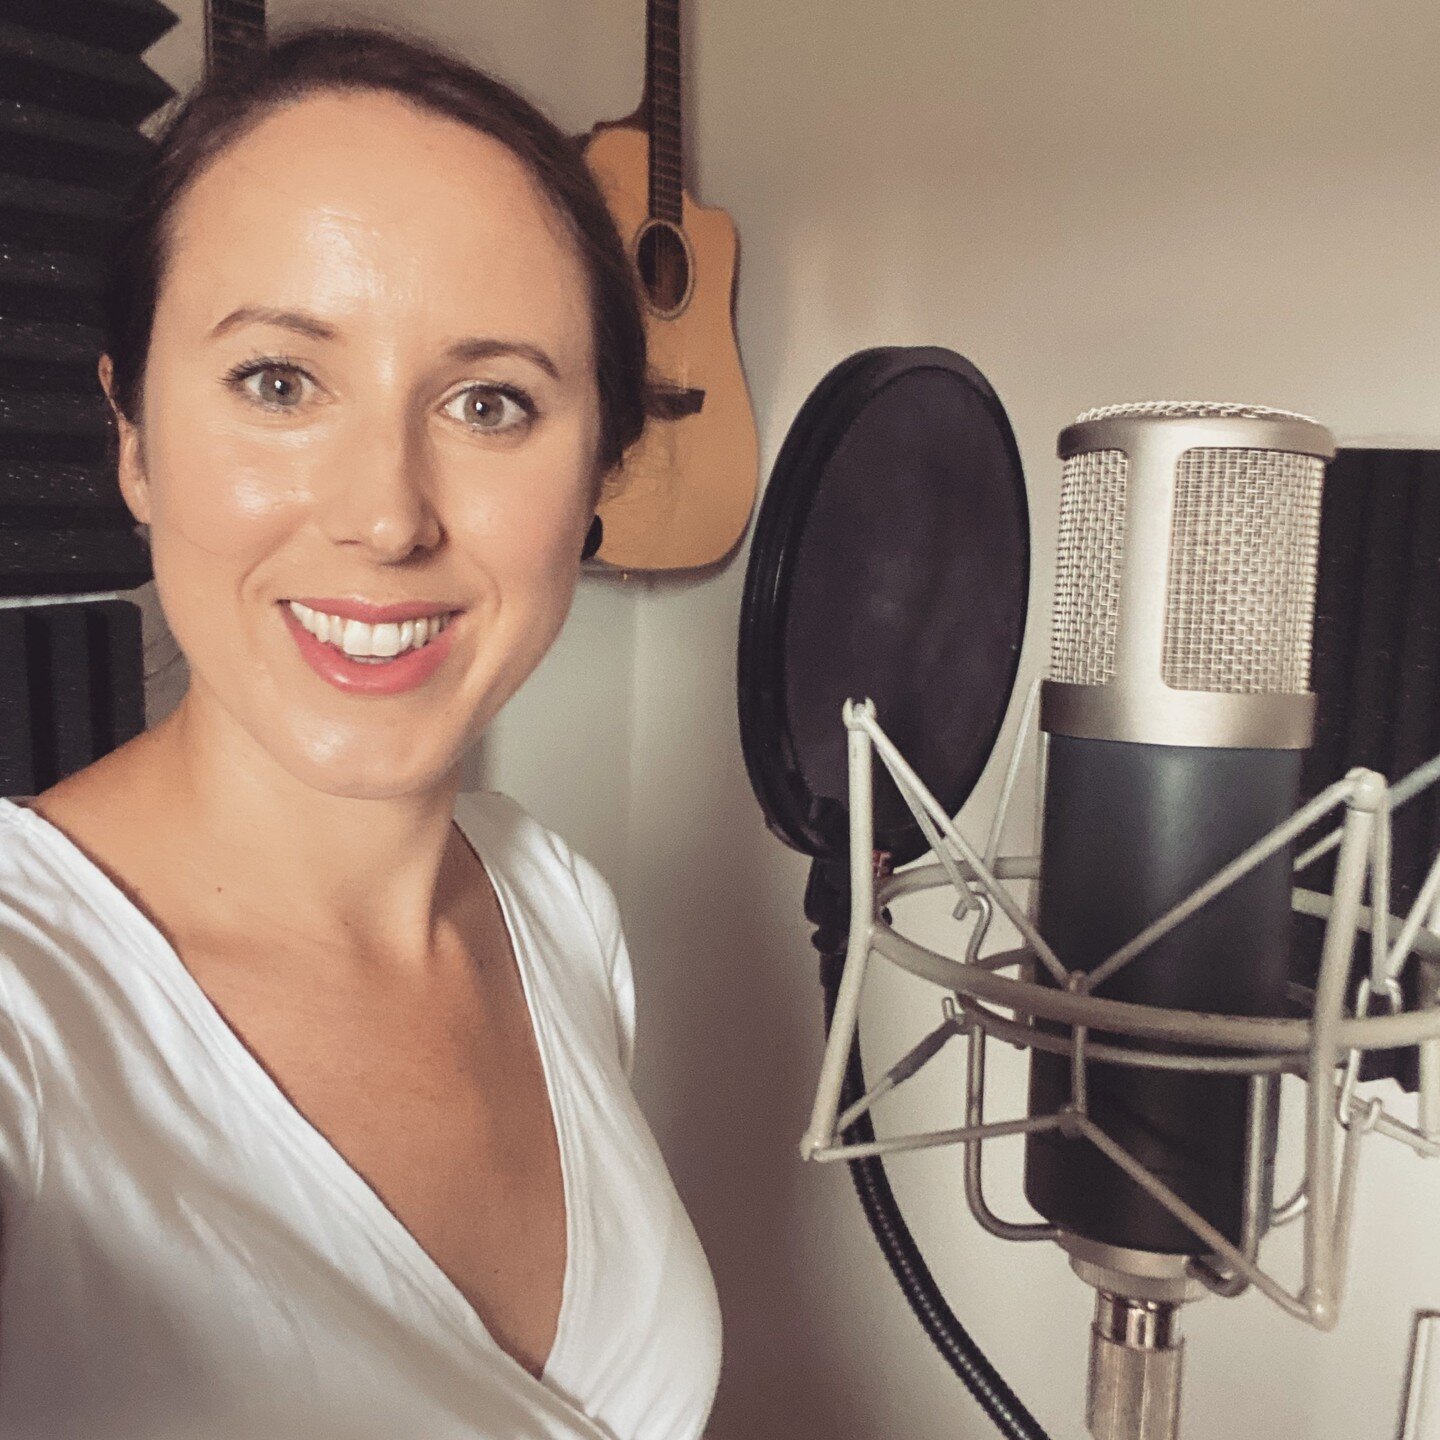 Have you ever thought of starting a podcast? I thought I would share with you why I wanted to start a podcast&hellip;

I had thought about it for a good 2 years before starting it.

I enjoyed listening to podcasts myself, and I love speaking.

I felt